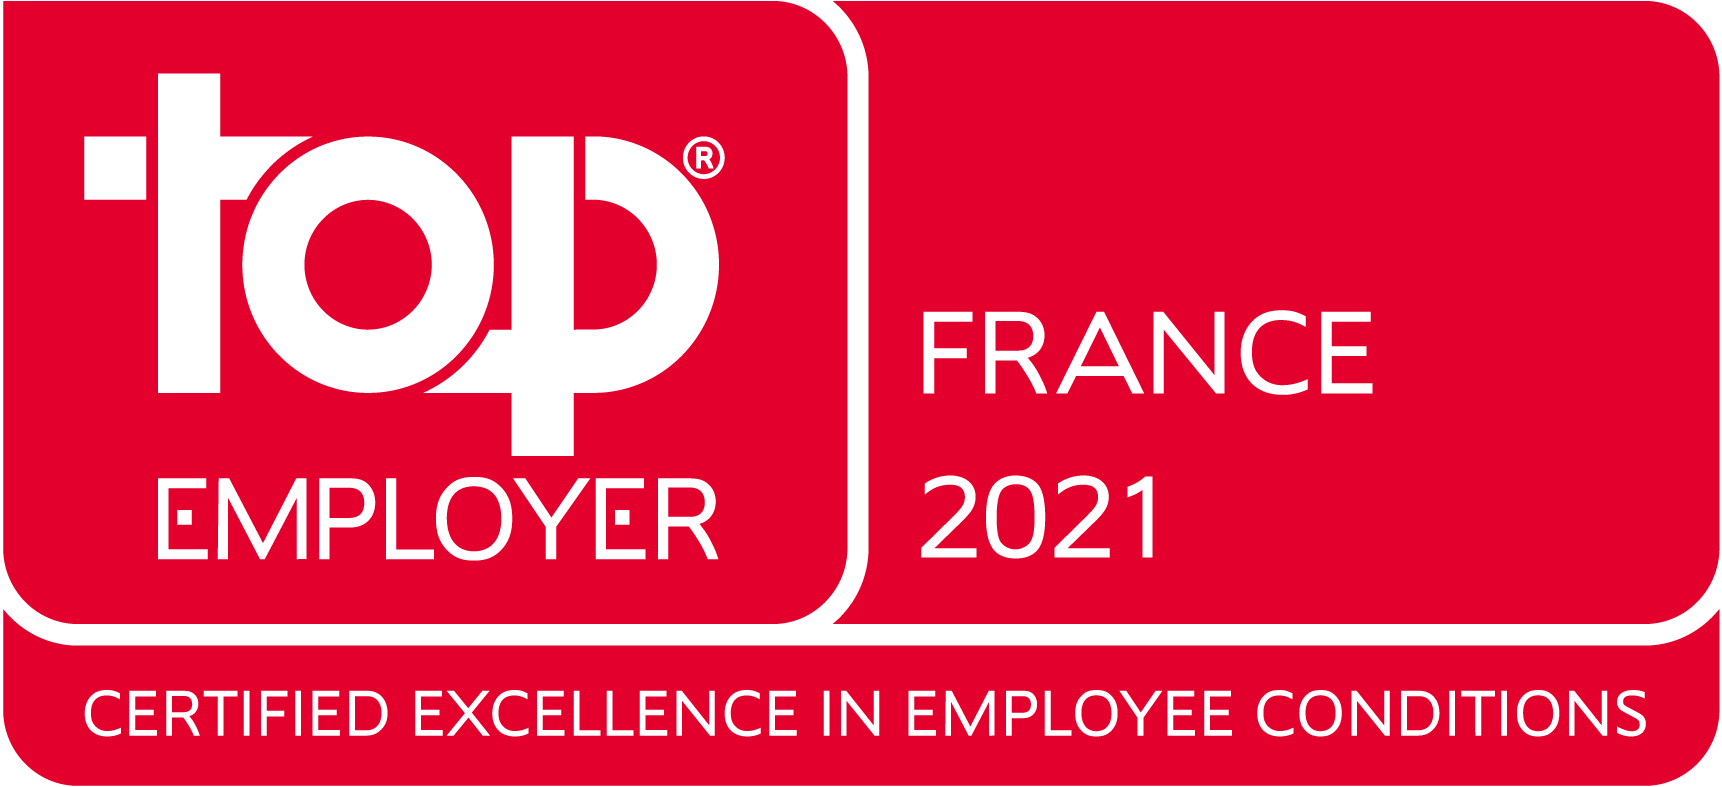 Top employer 2020 France